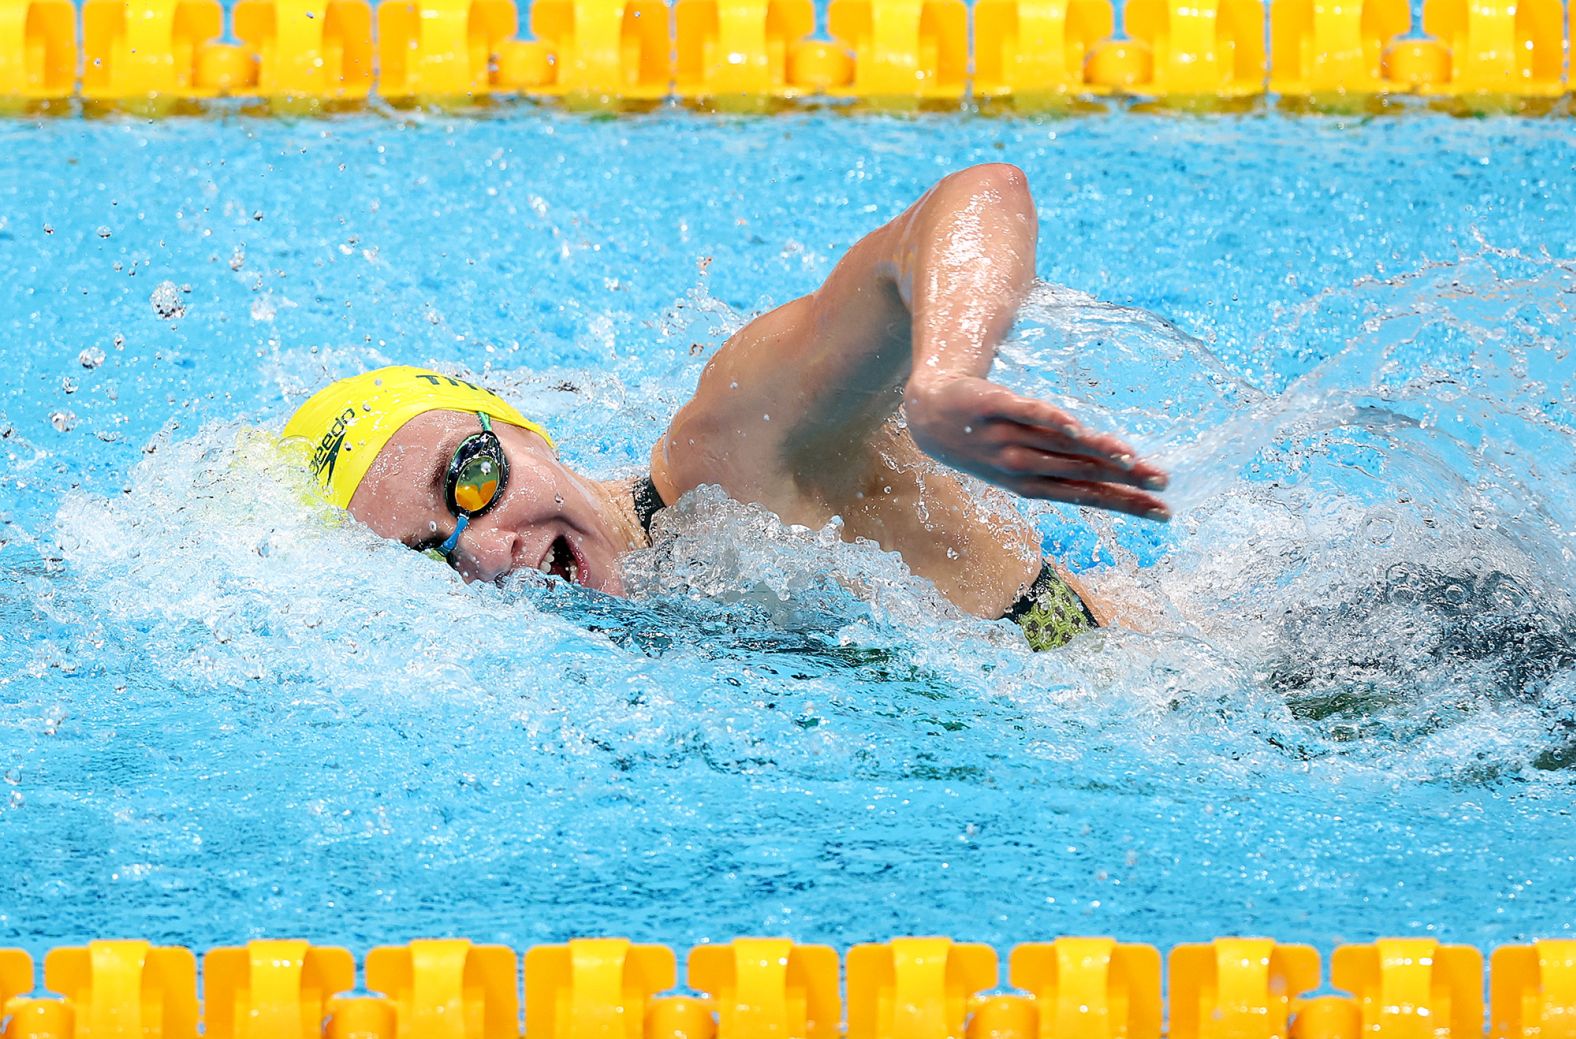 Australia's Ariarne Titmus swims her way to gold in the 200-meter freestyle on July 28. She also <a href="index.php?page=&url=https%3A%2F%2Fwww.cnn.com%2Fworld%2Flive-news%2Ftokyo-2020-olympics-07-27-21-spt%2Fh_2678ef626f78848939865d4d3a7abd69" target="_blank">set a new Olympic record,</a> finishing in 1:53.50. It is her second gold of these Olympics, as she also won the 400-meter freestyle.